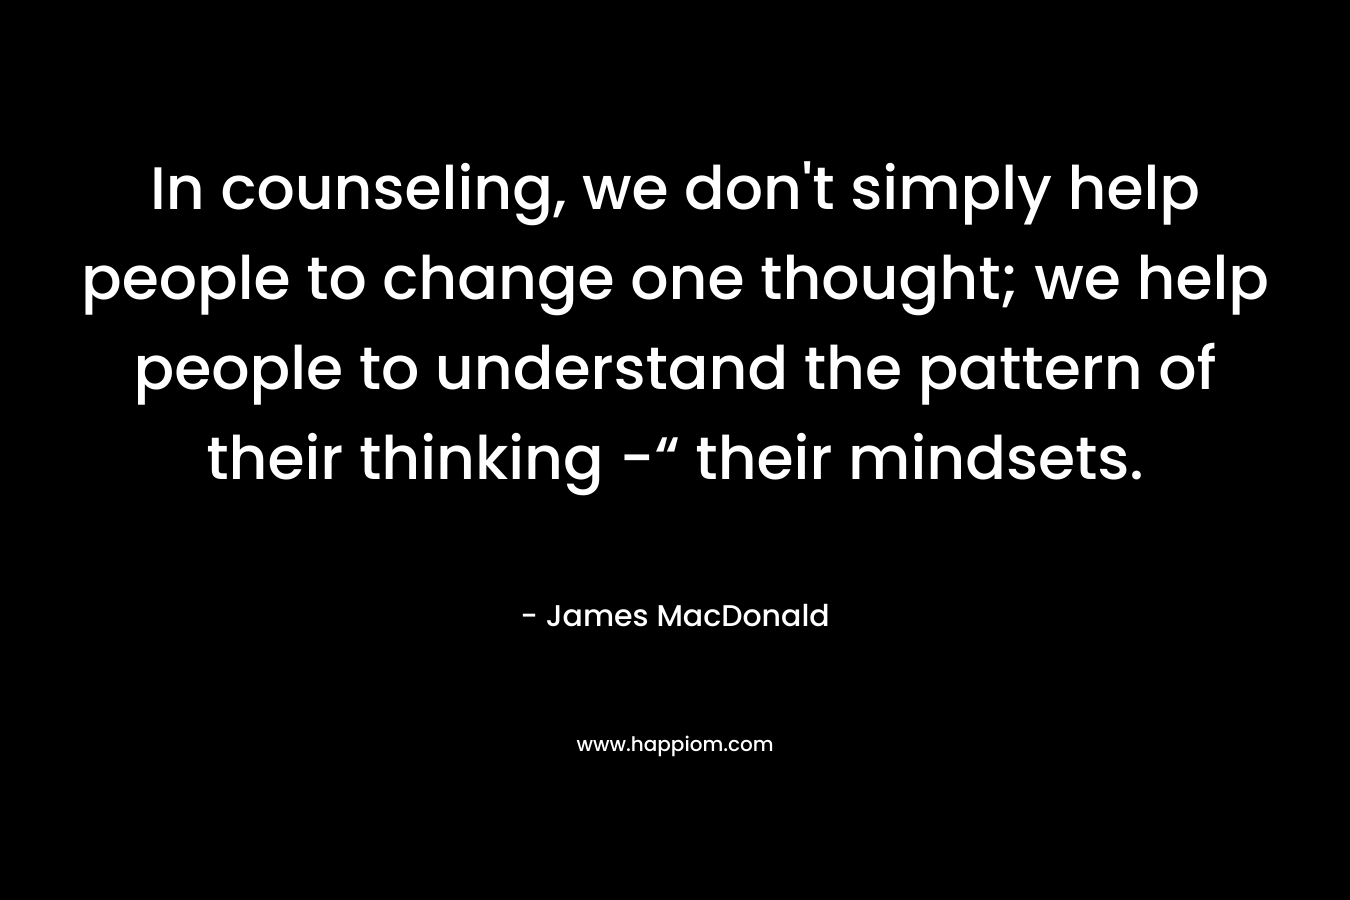 In counseling, we don't simply help people to change one thought; we help people to understand the pattern of their thinking -“ their mindsets.